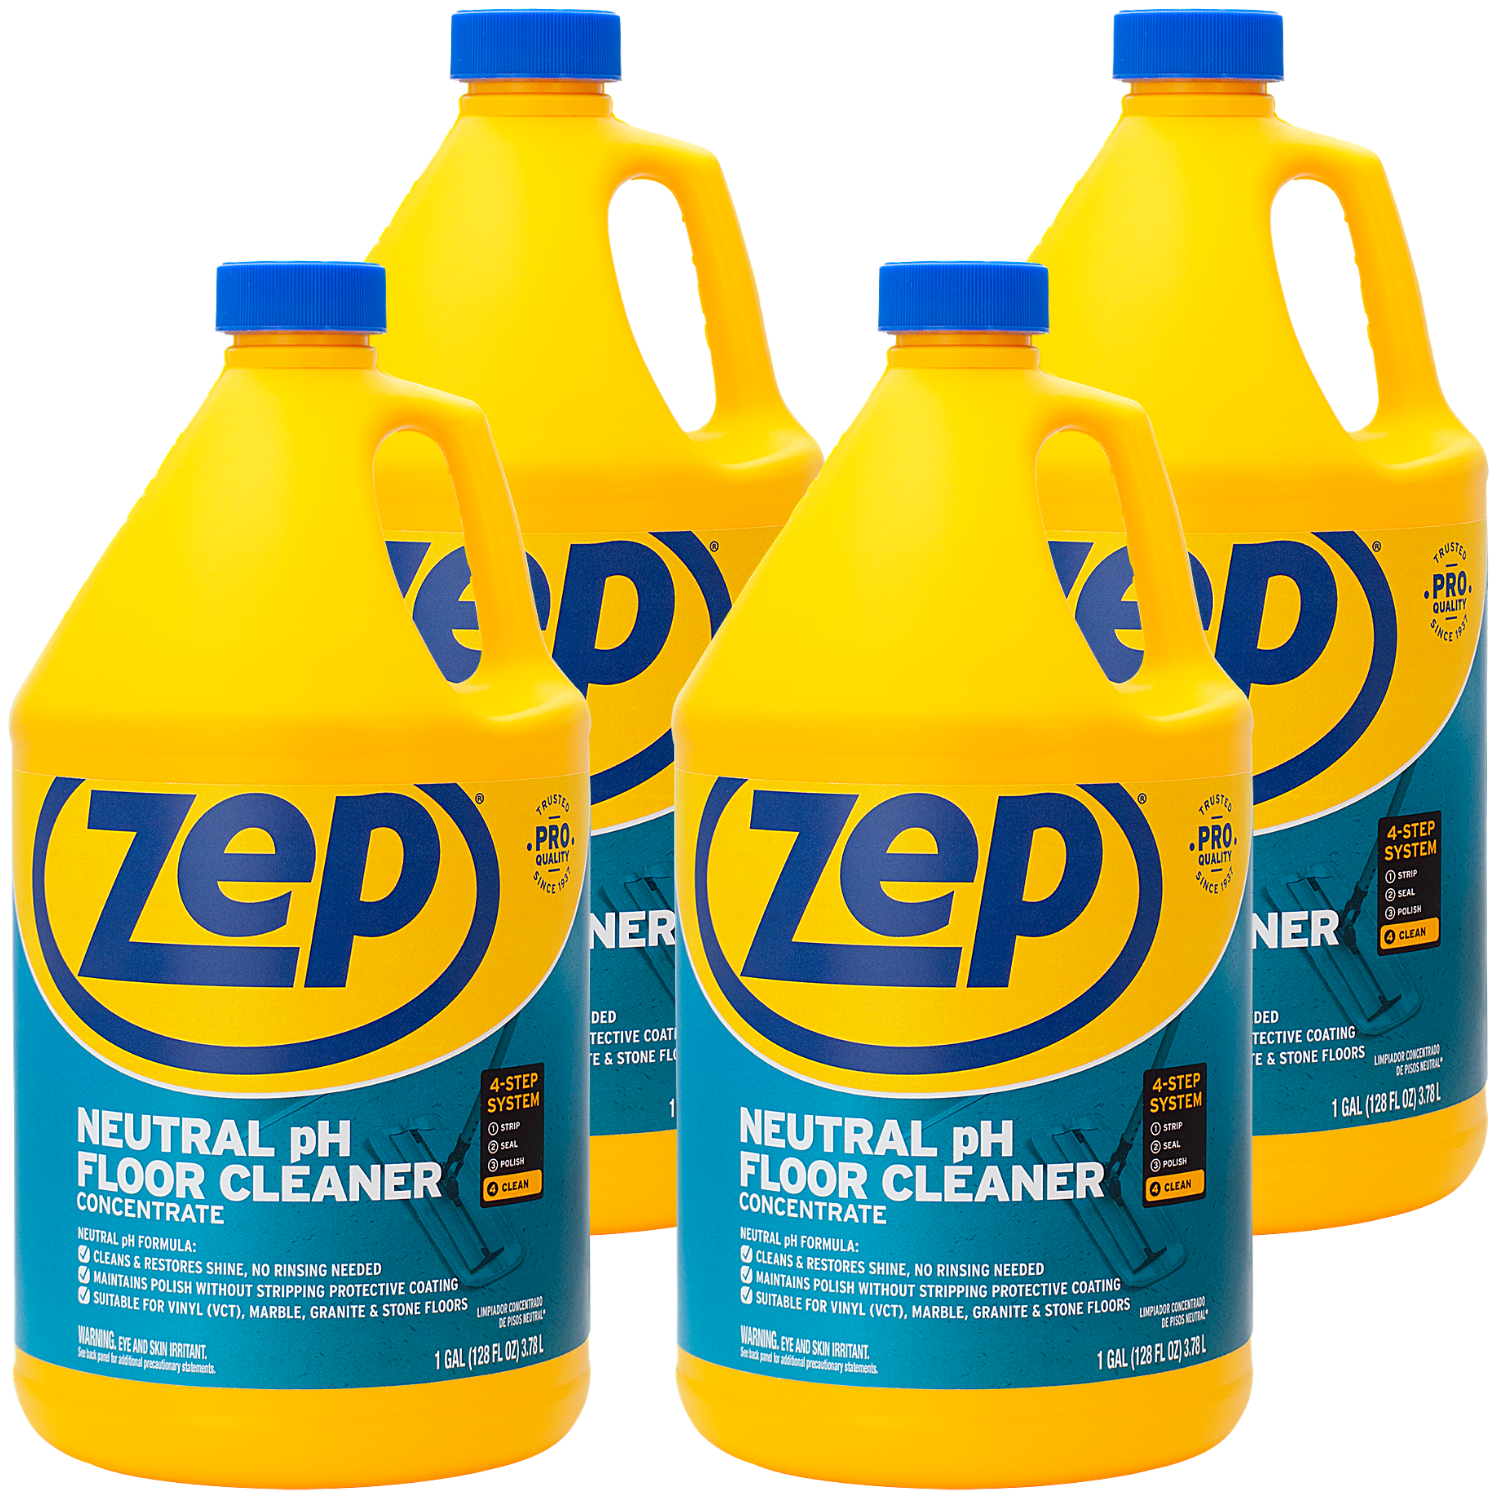 Zep Driveway and Concrete Cleaner and Degreaser Concentrate, 128 oz